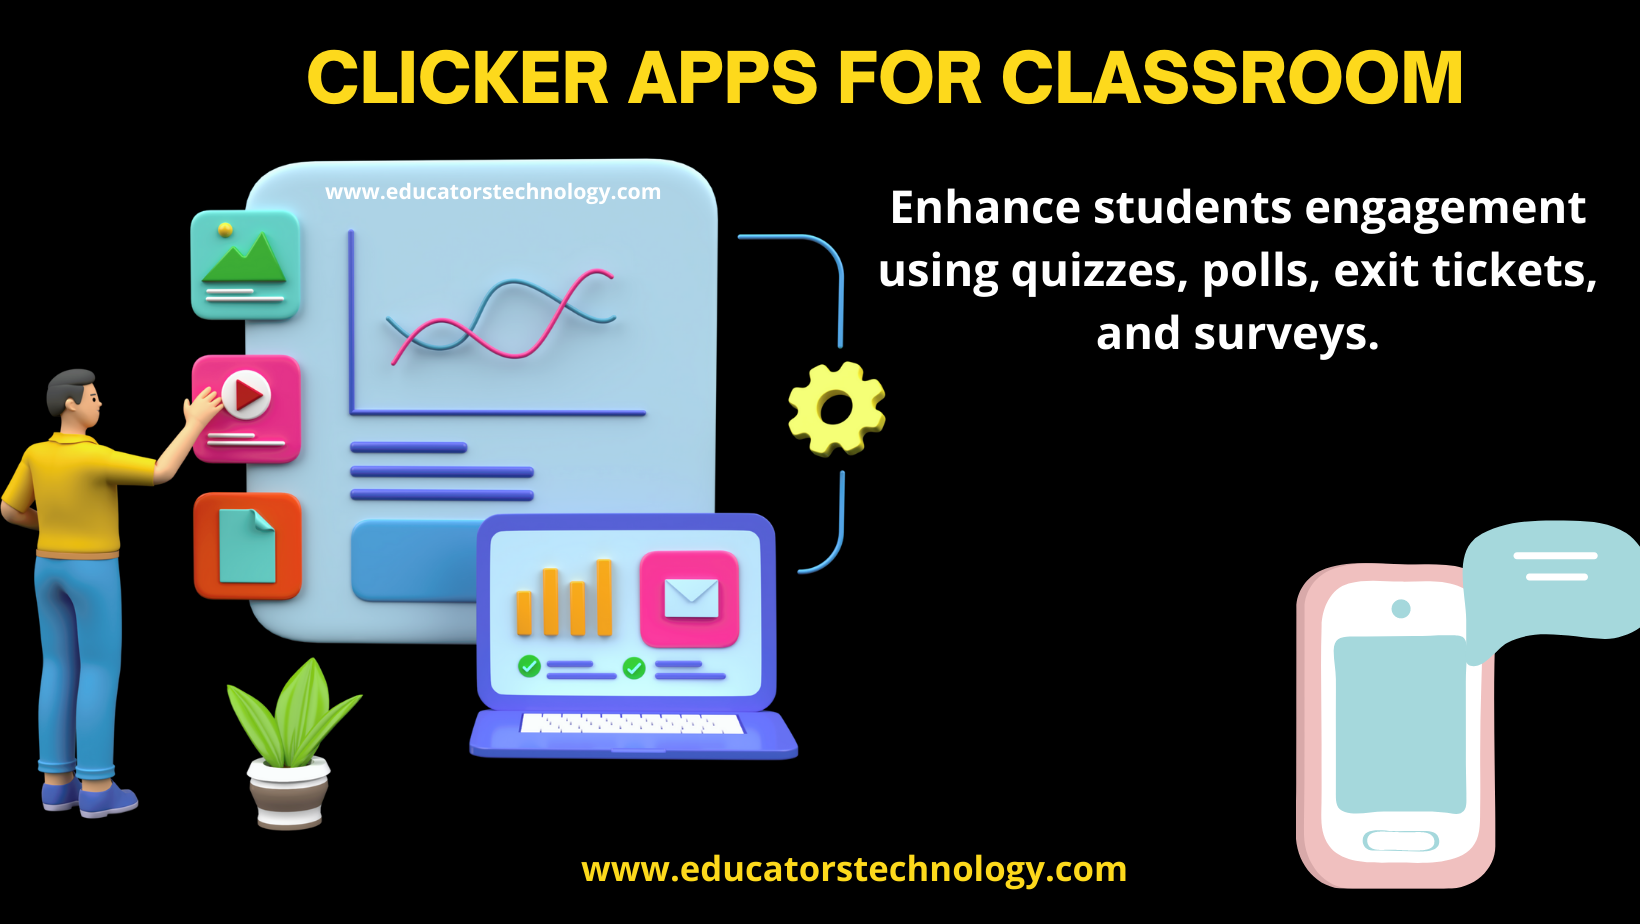 Effective Use of Clickers in the Classroom - Center for Teaching Excellence